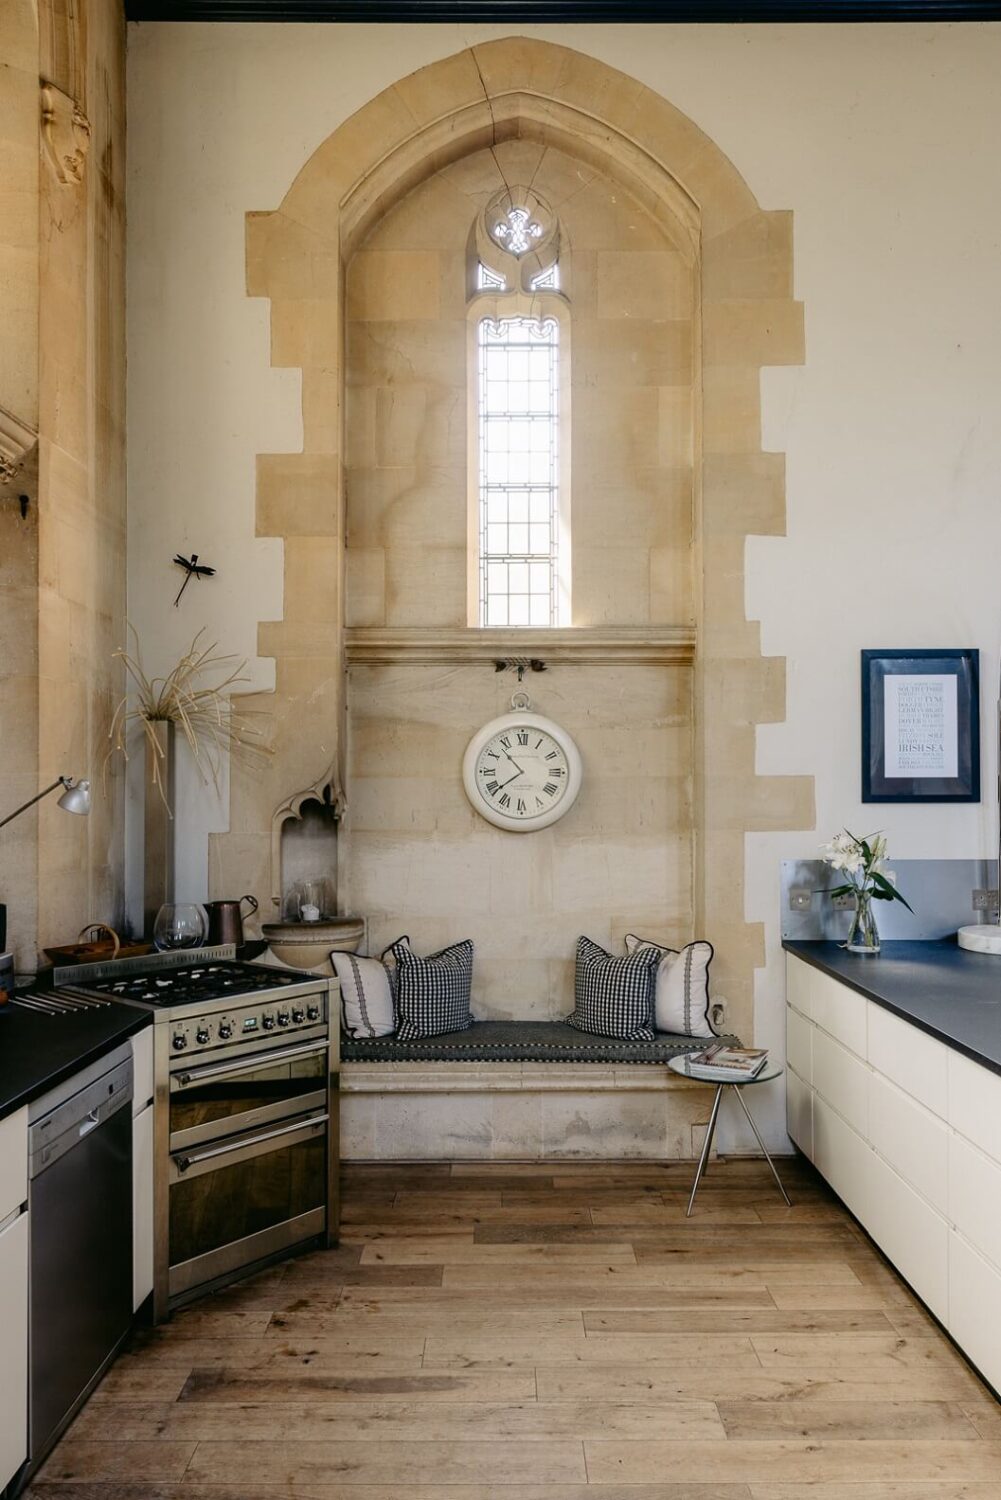 kitchen-arched-window-church-conversion-england-nordroom